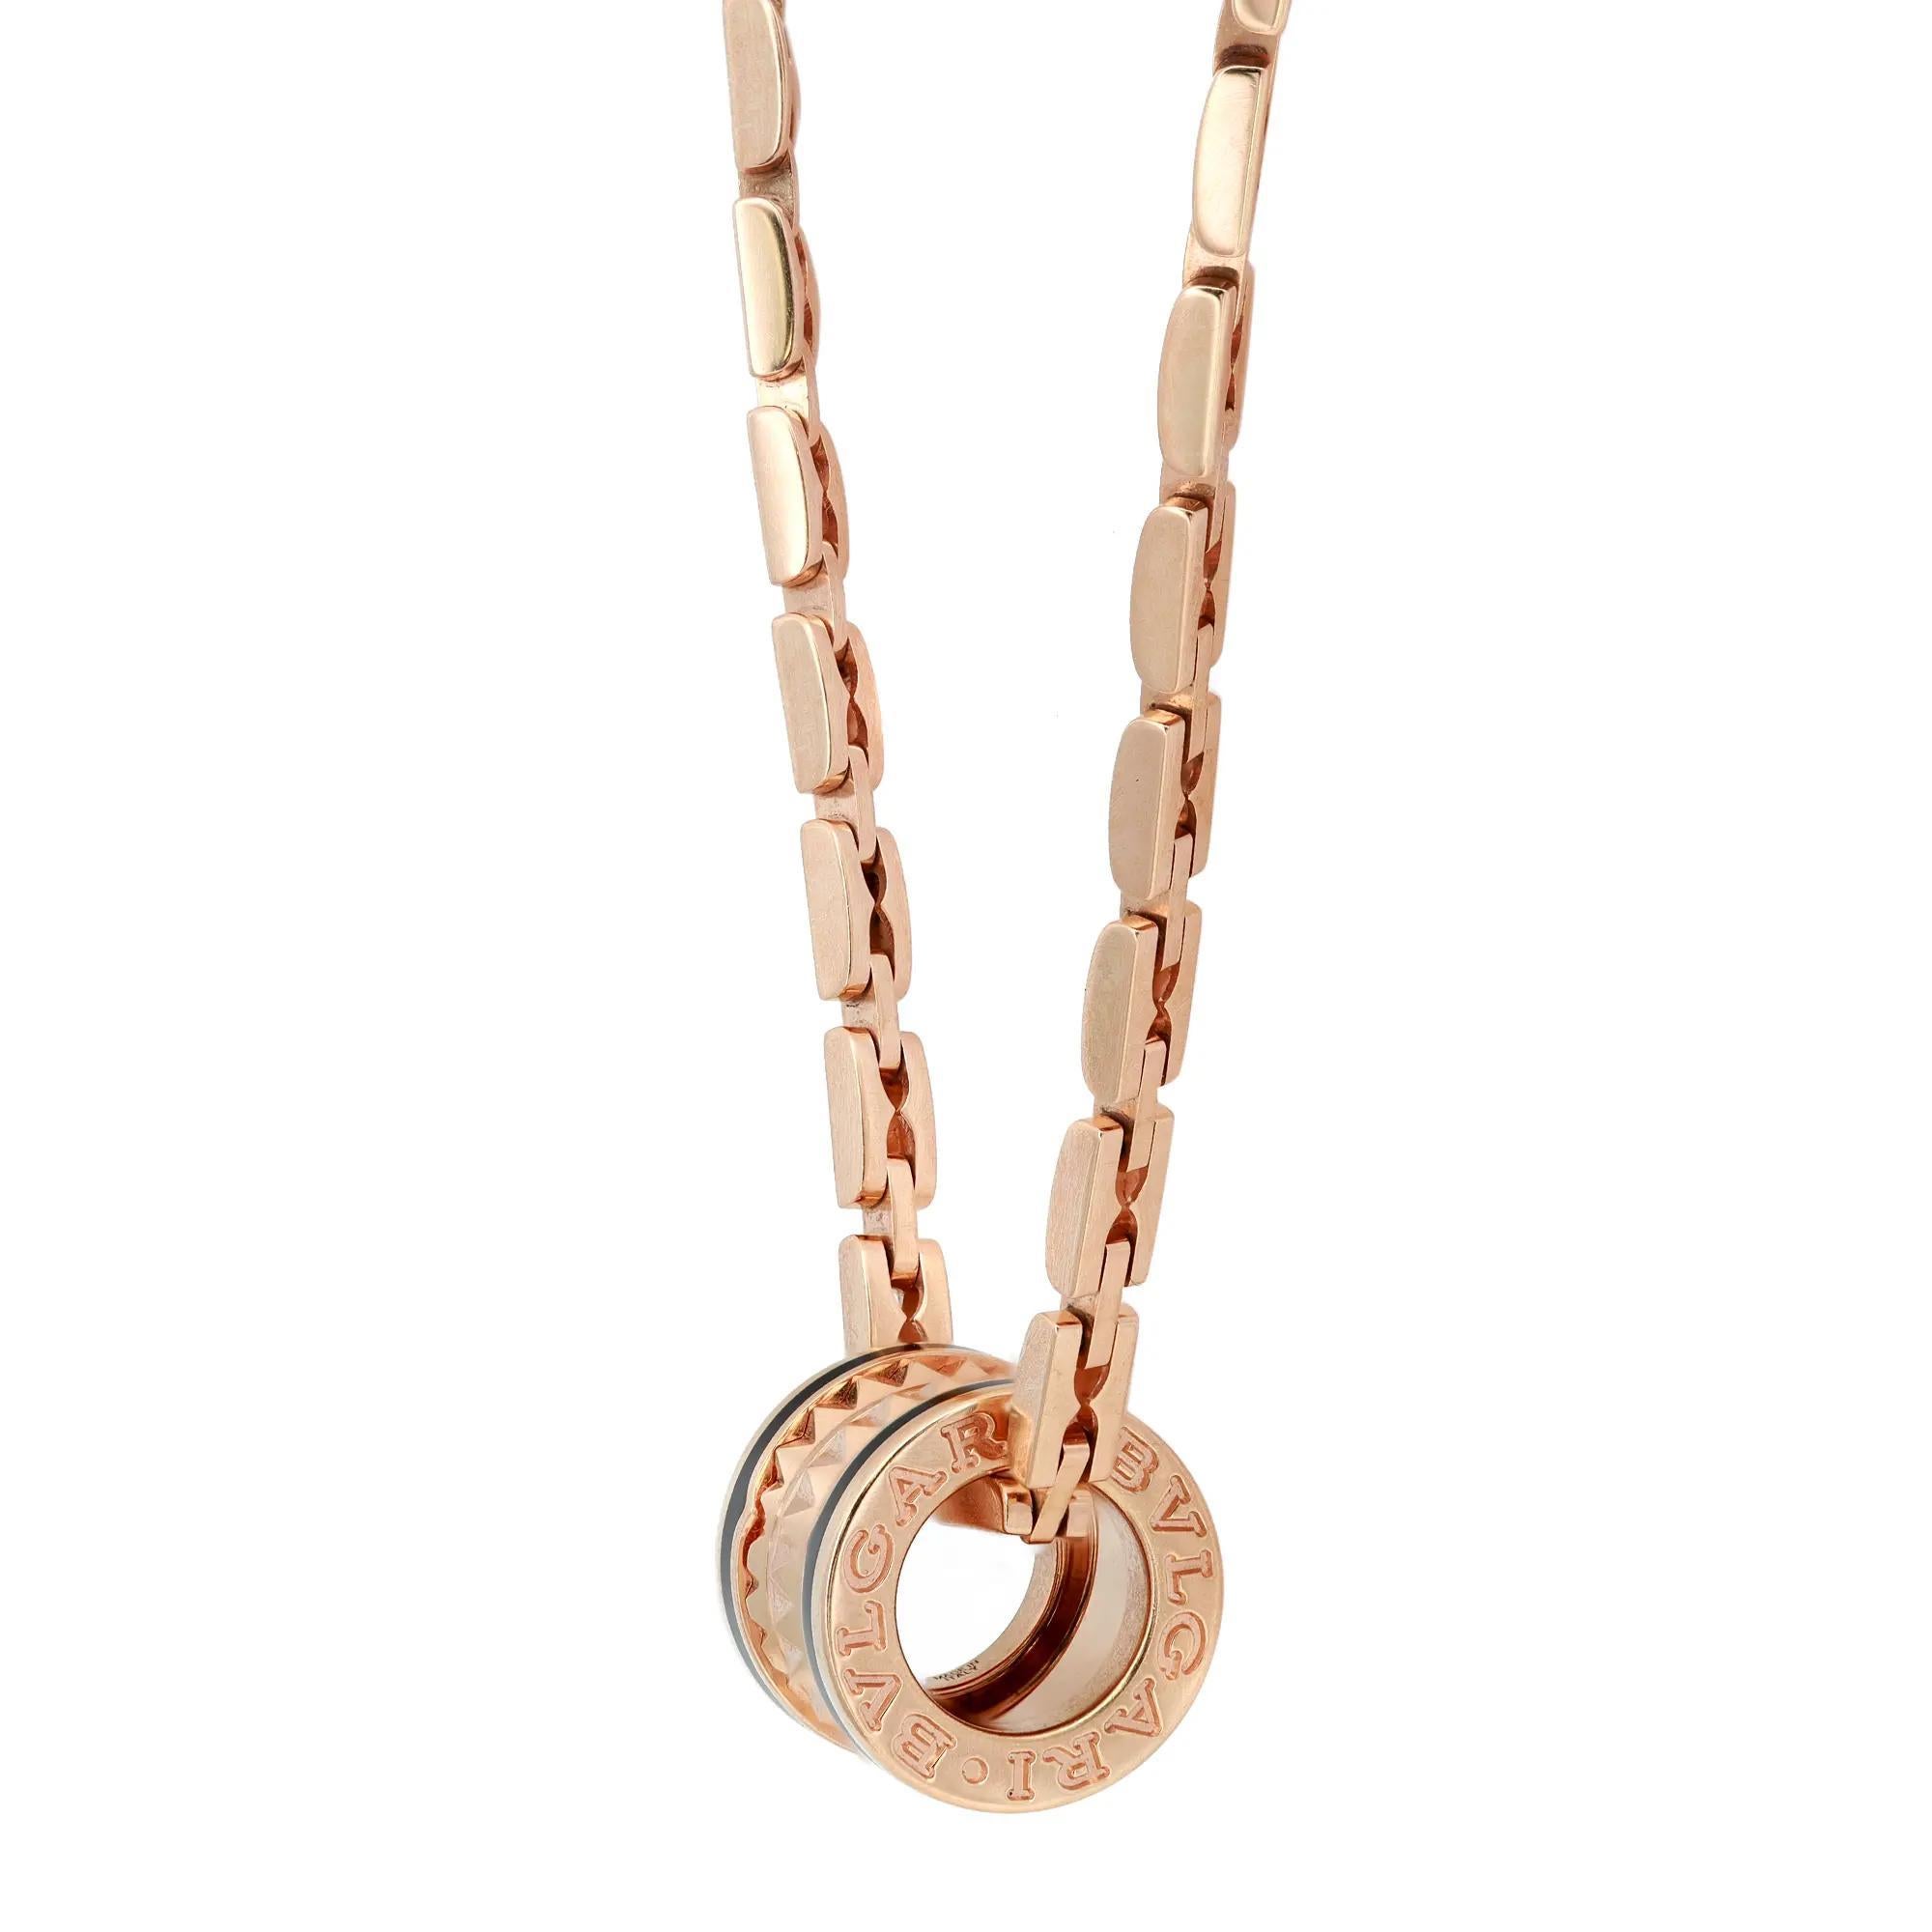 Bulgari’s creative vision infused with a touch of irreverence features a distinctive chain inspired by the iconic ring's silhouette. Crafted in lustrous 18K rose gold. This necklace highlights a spiral B.Zero1 rock pendant with black ceramic inserts